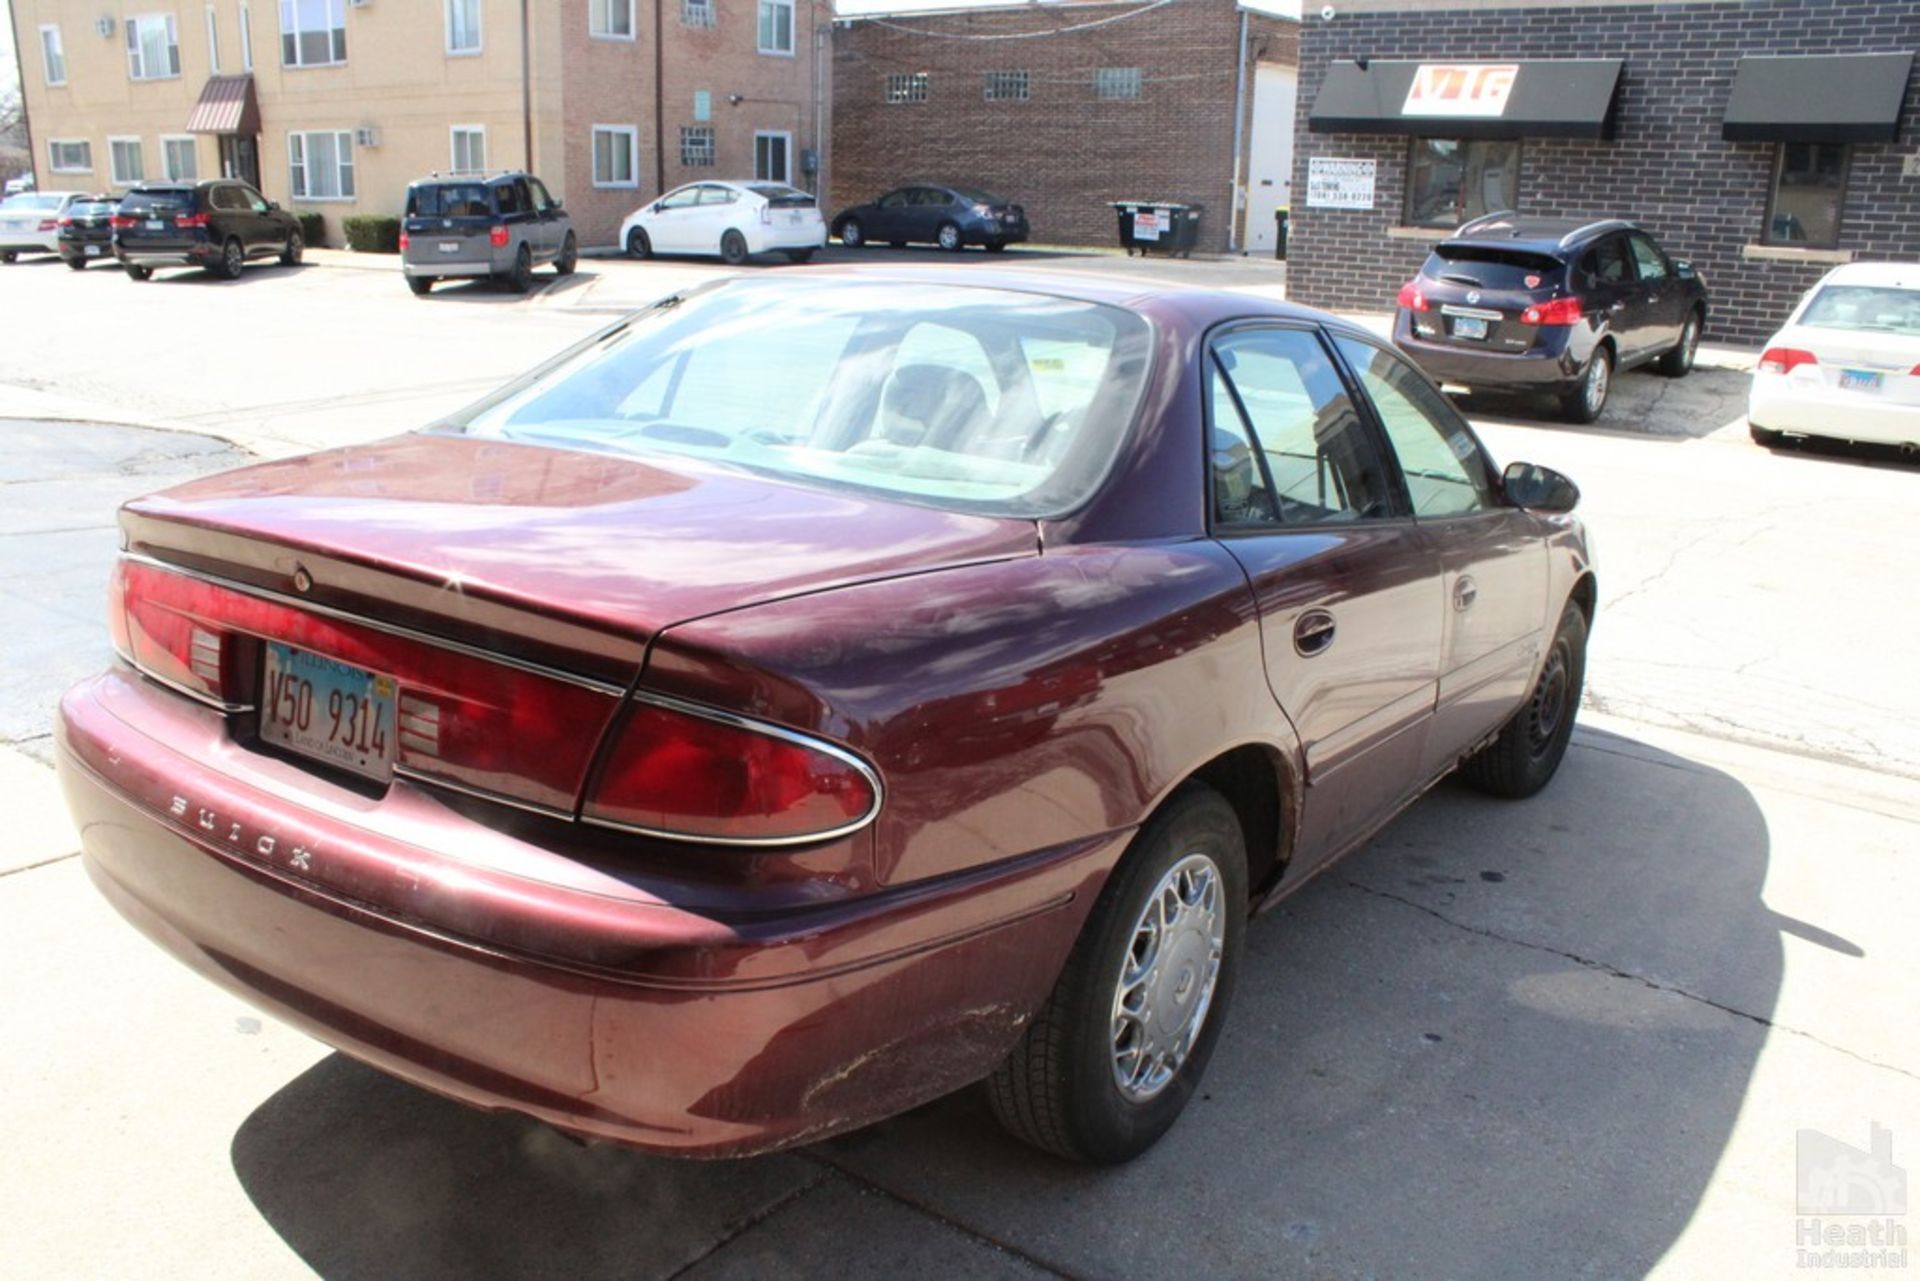 2001 BUICK MODEL CENTURY AUTOMOBILE, VIN: 2G4AS52J511184800, AUTOMATIC TRANSMISSION, CAN'T READ - Image 3 of 7